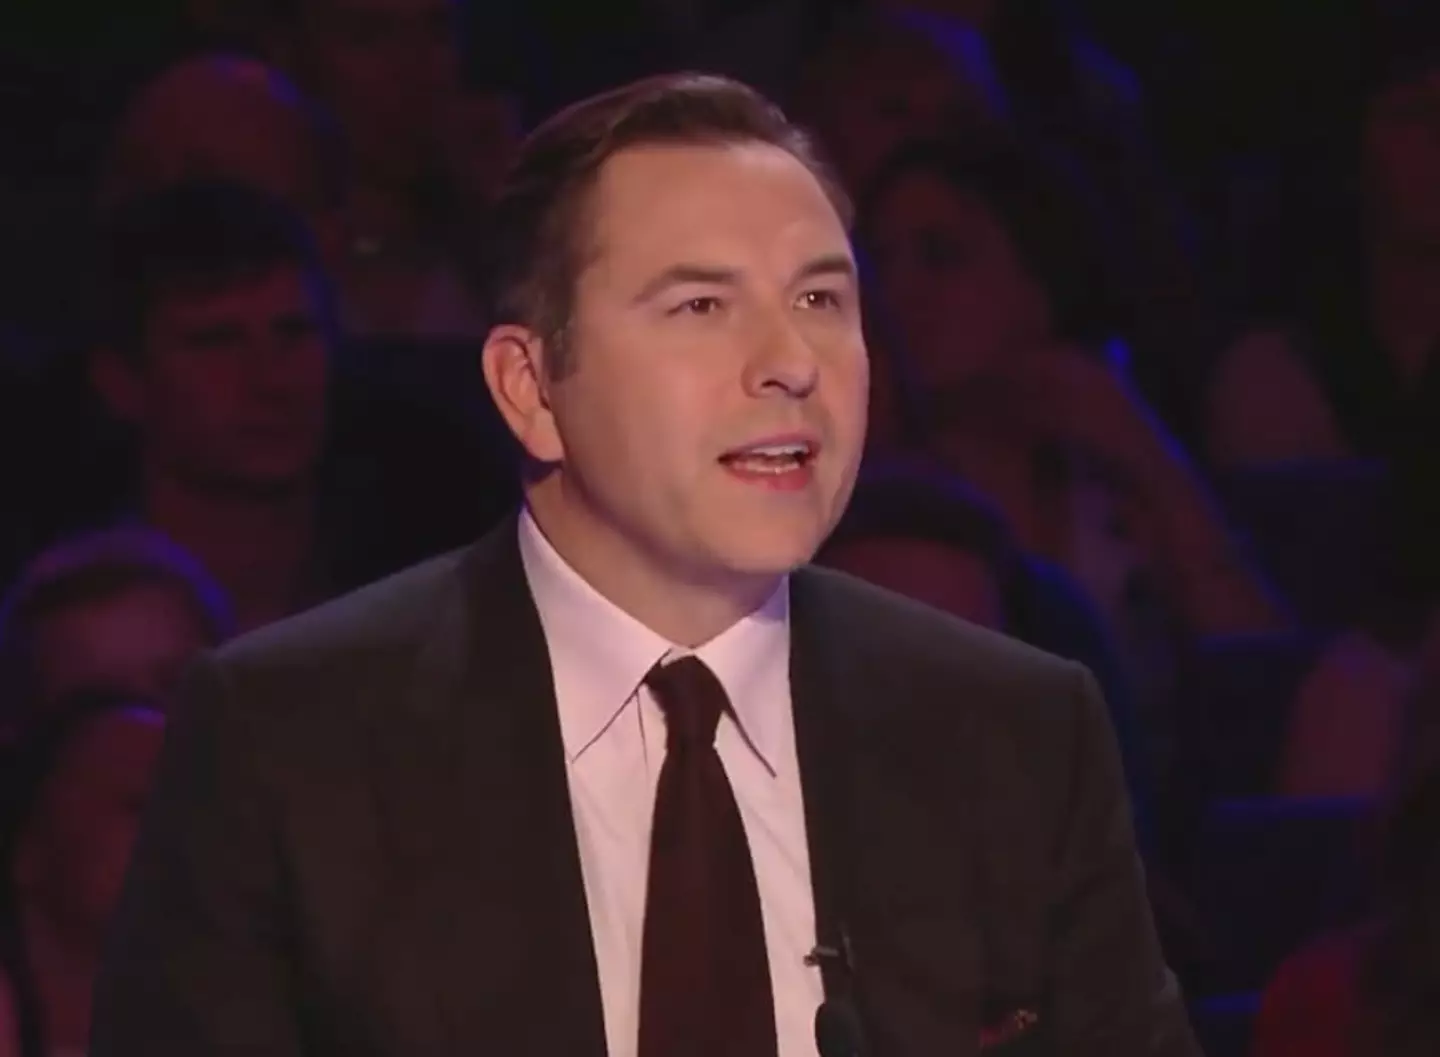 Walliams was a judge on the show for 10 years.